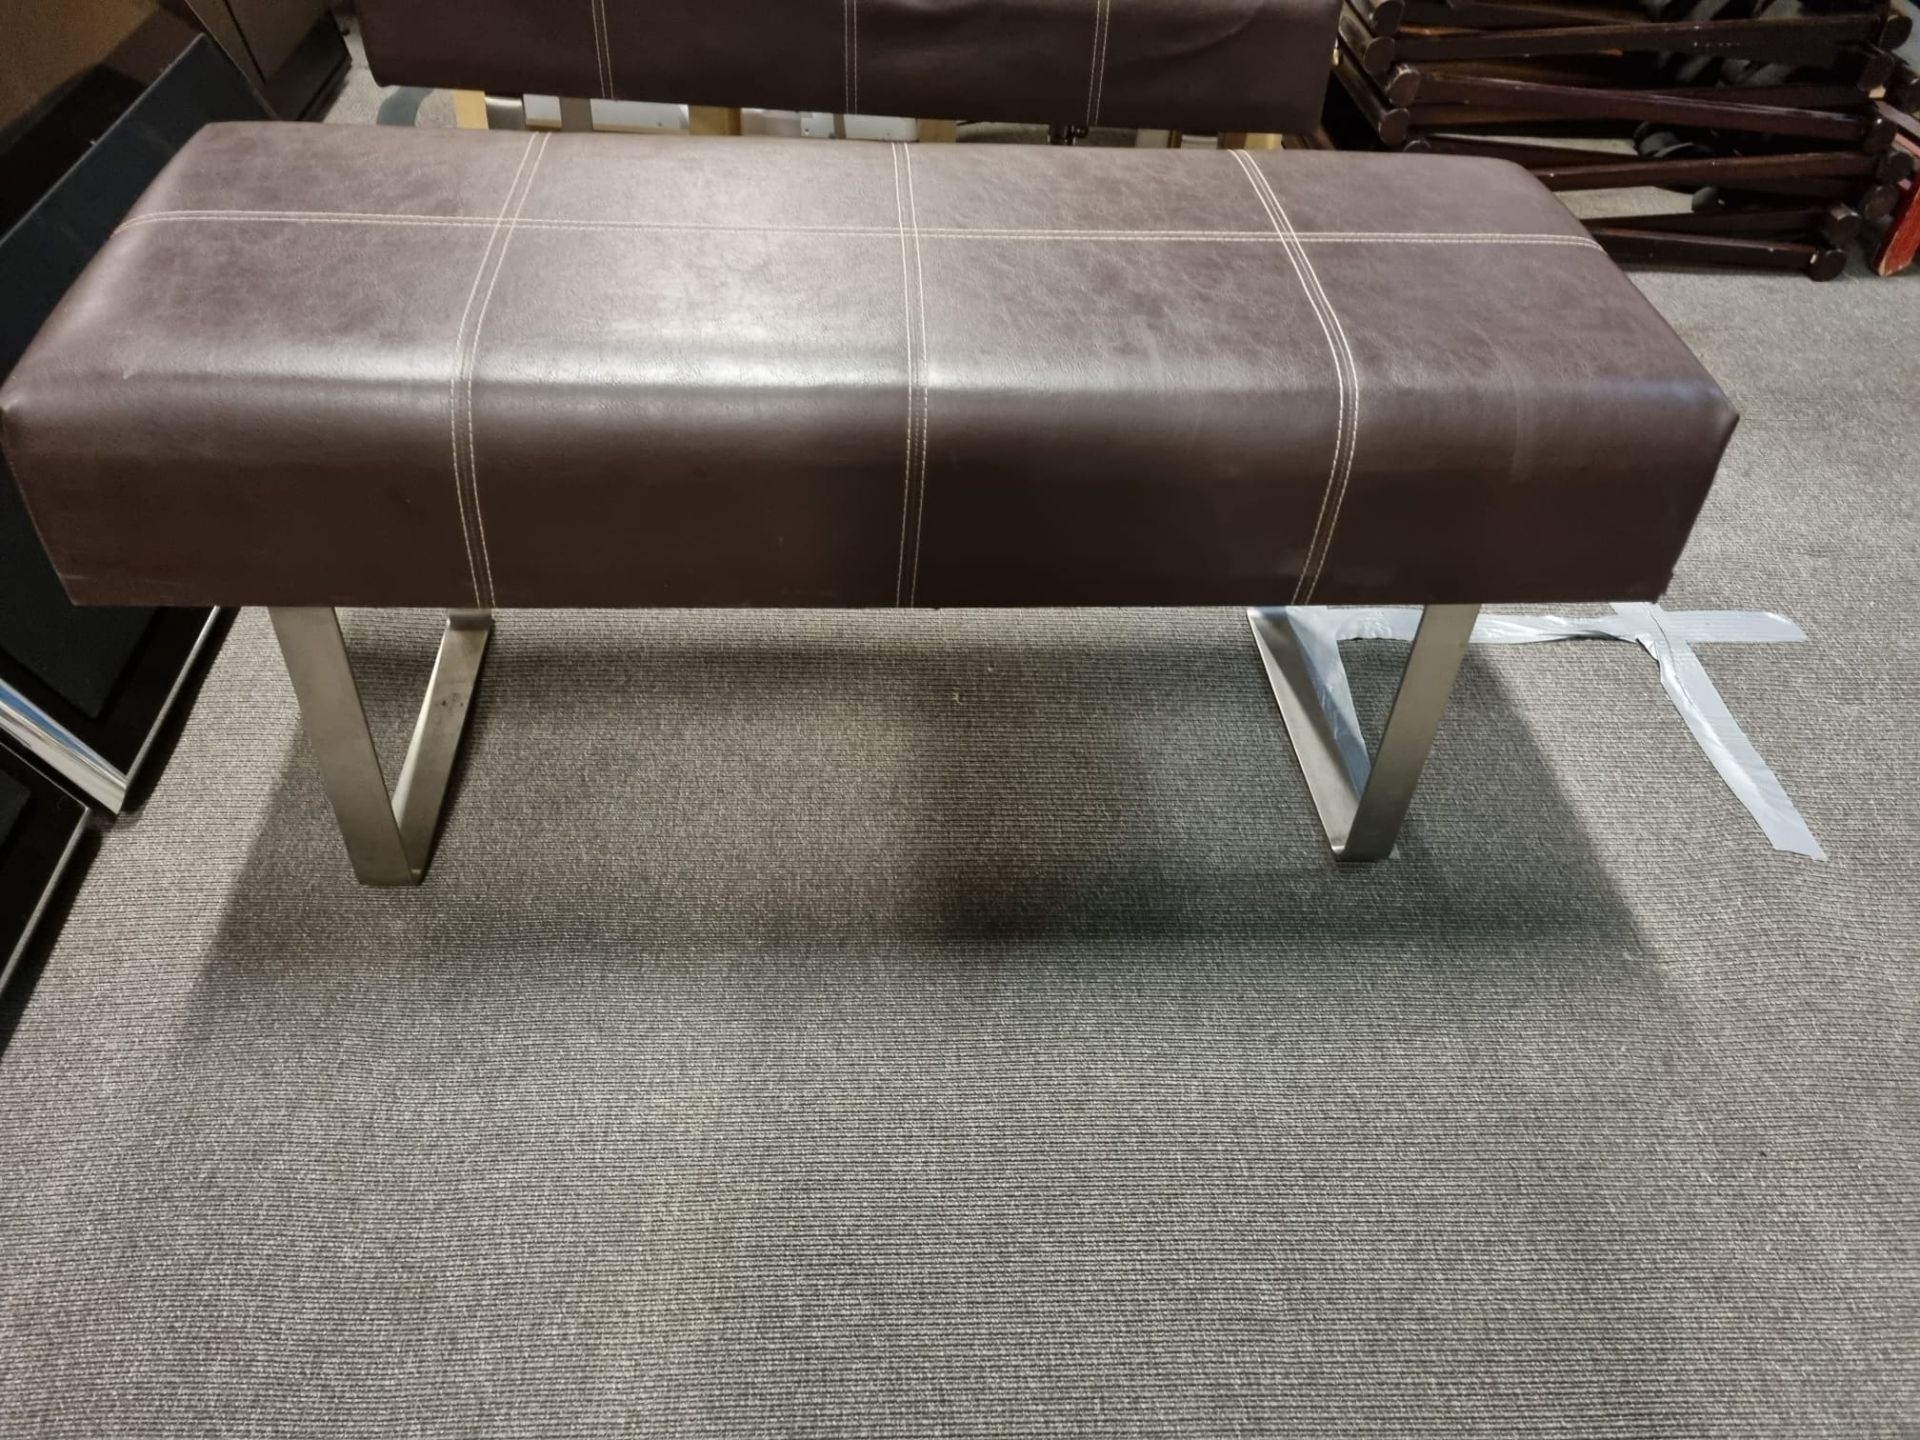 Vintage Brown Stitched Leather Bench With Polished Steel Legs 1400 x 400 x 420mm - Image 2 of 2